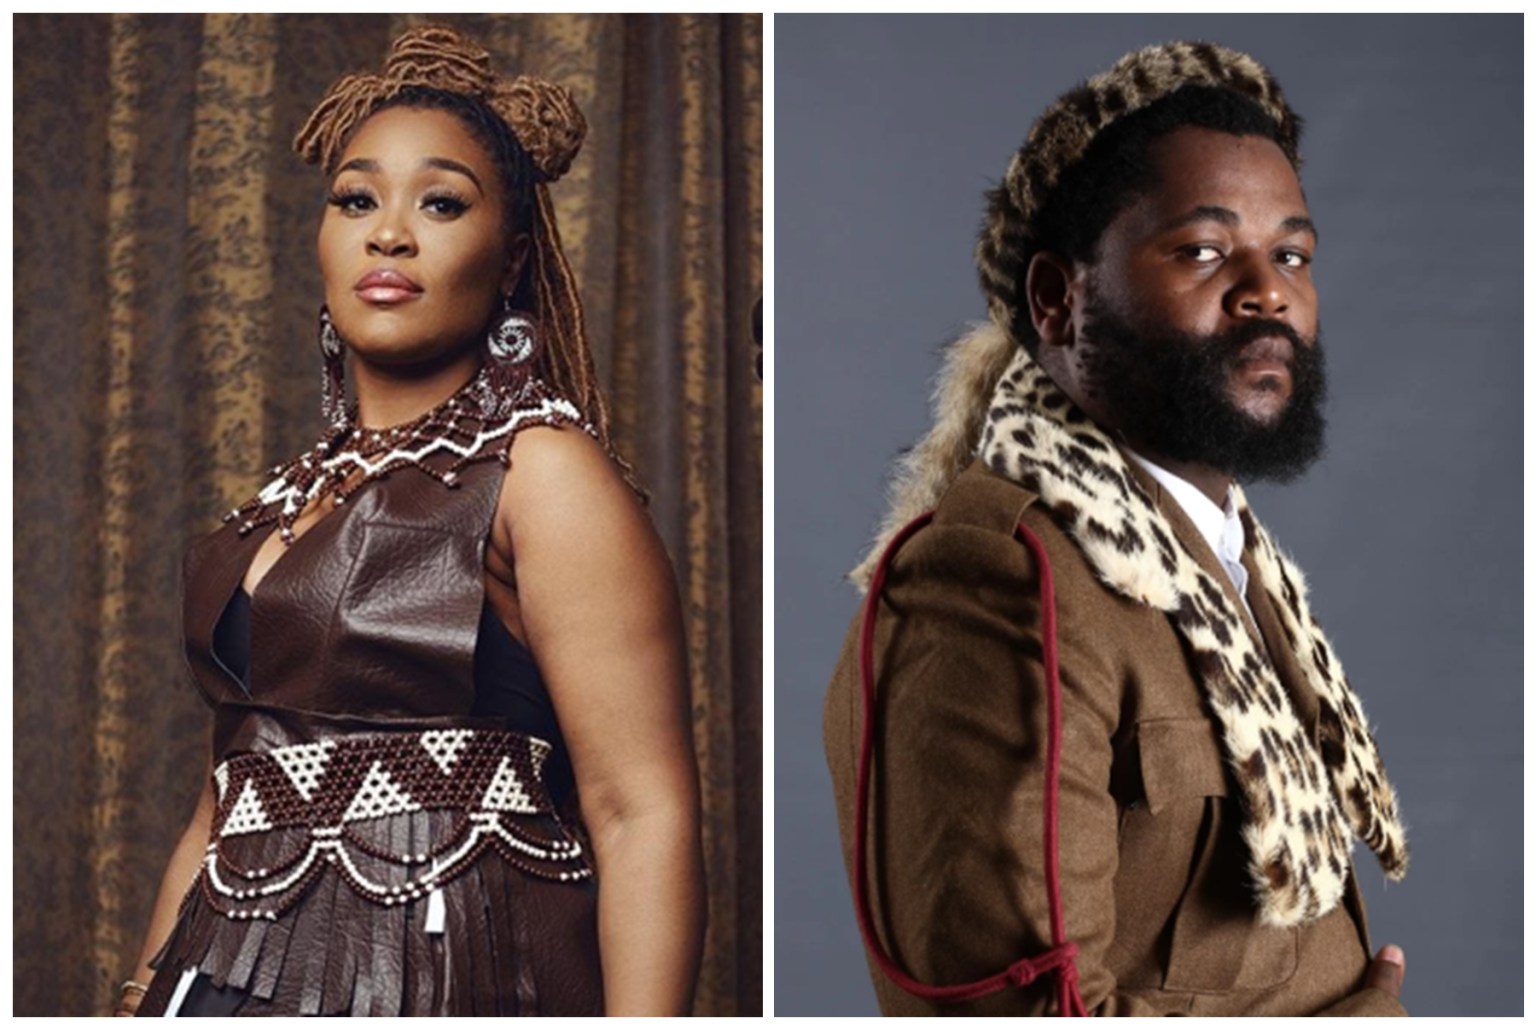 Lady Zamar is unbothered by the noise from Sjava’s supporters